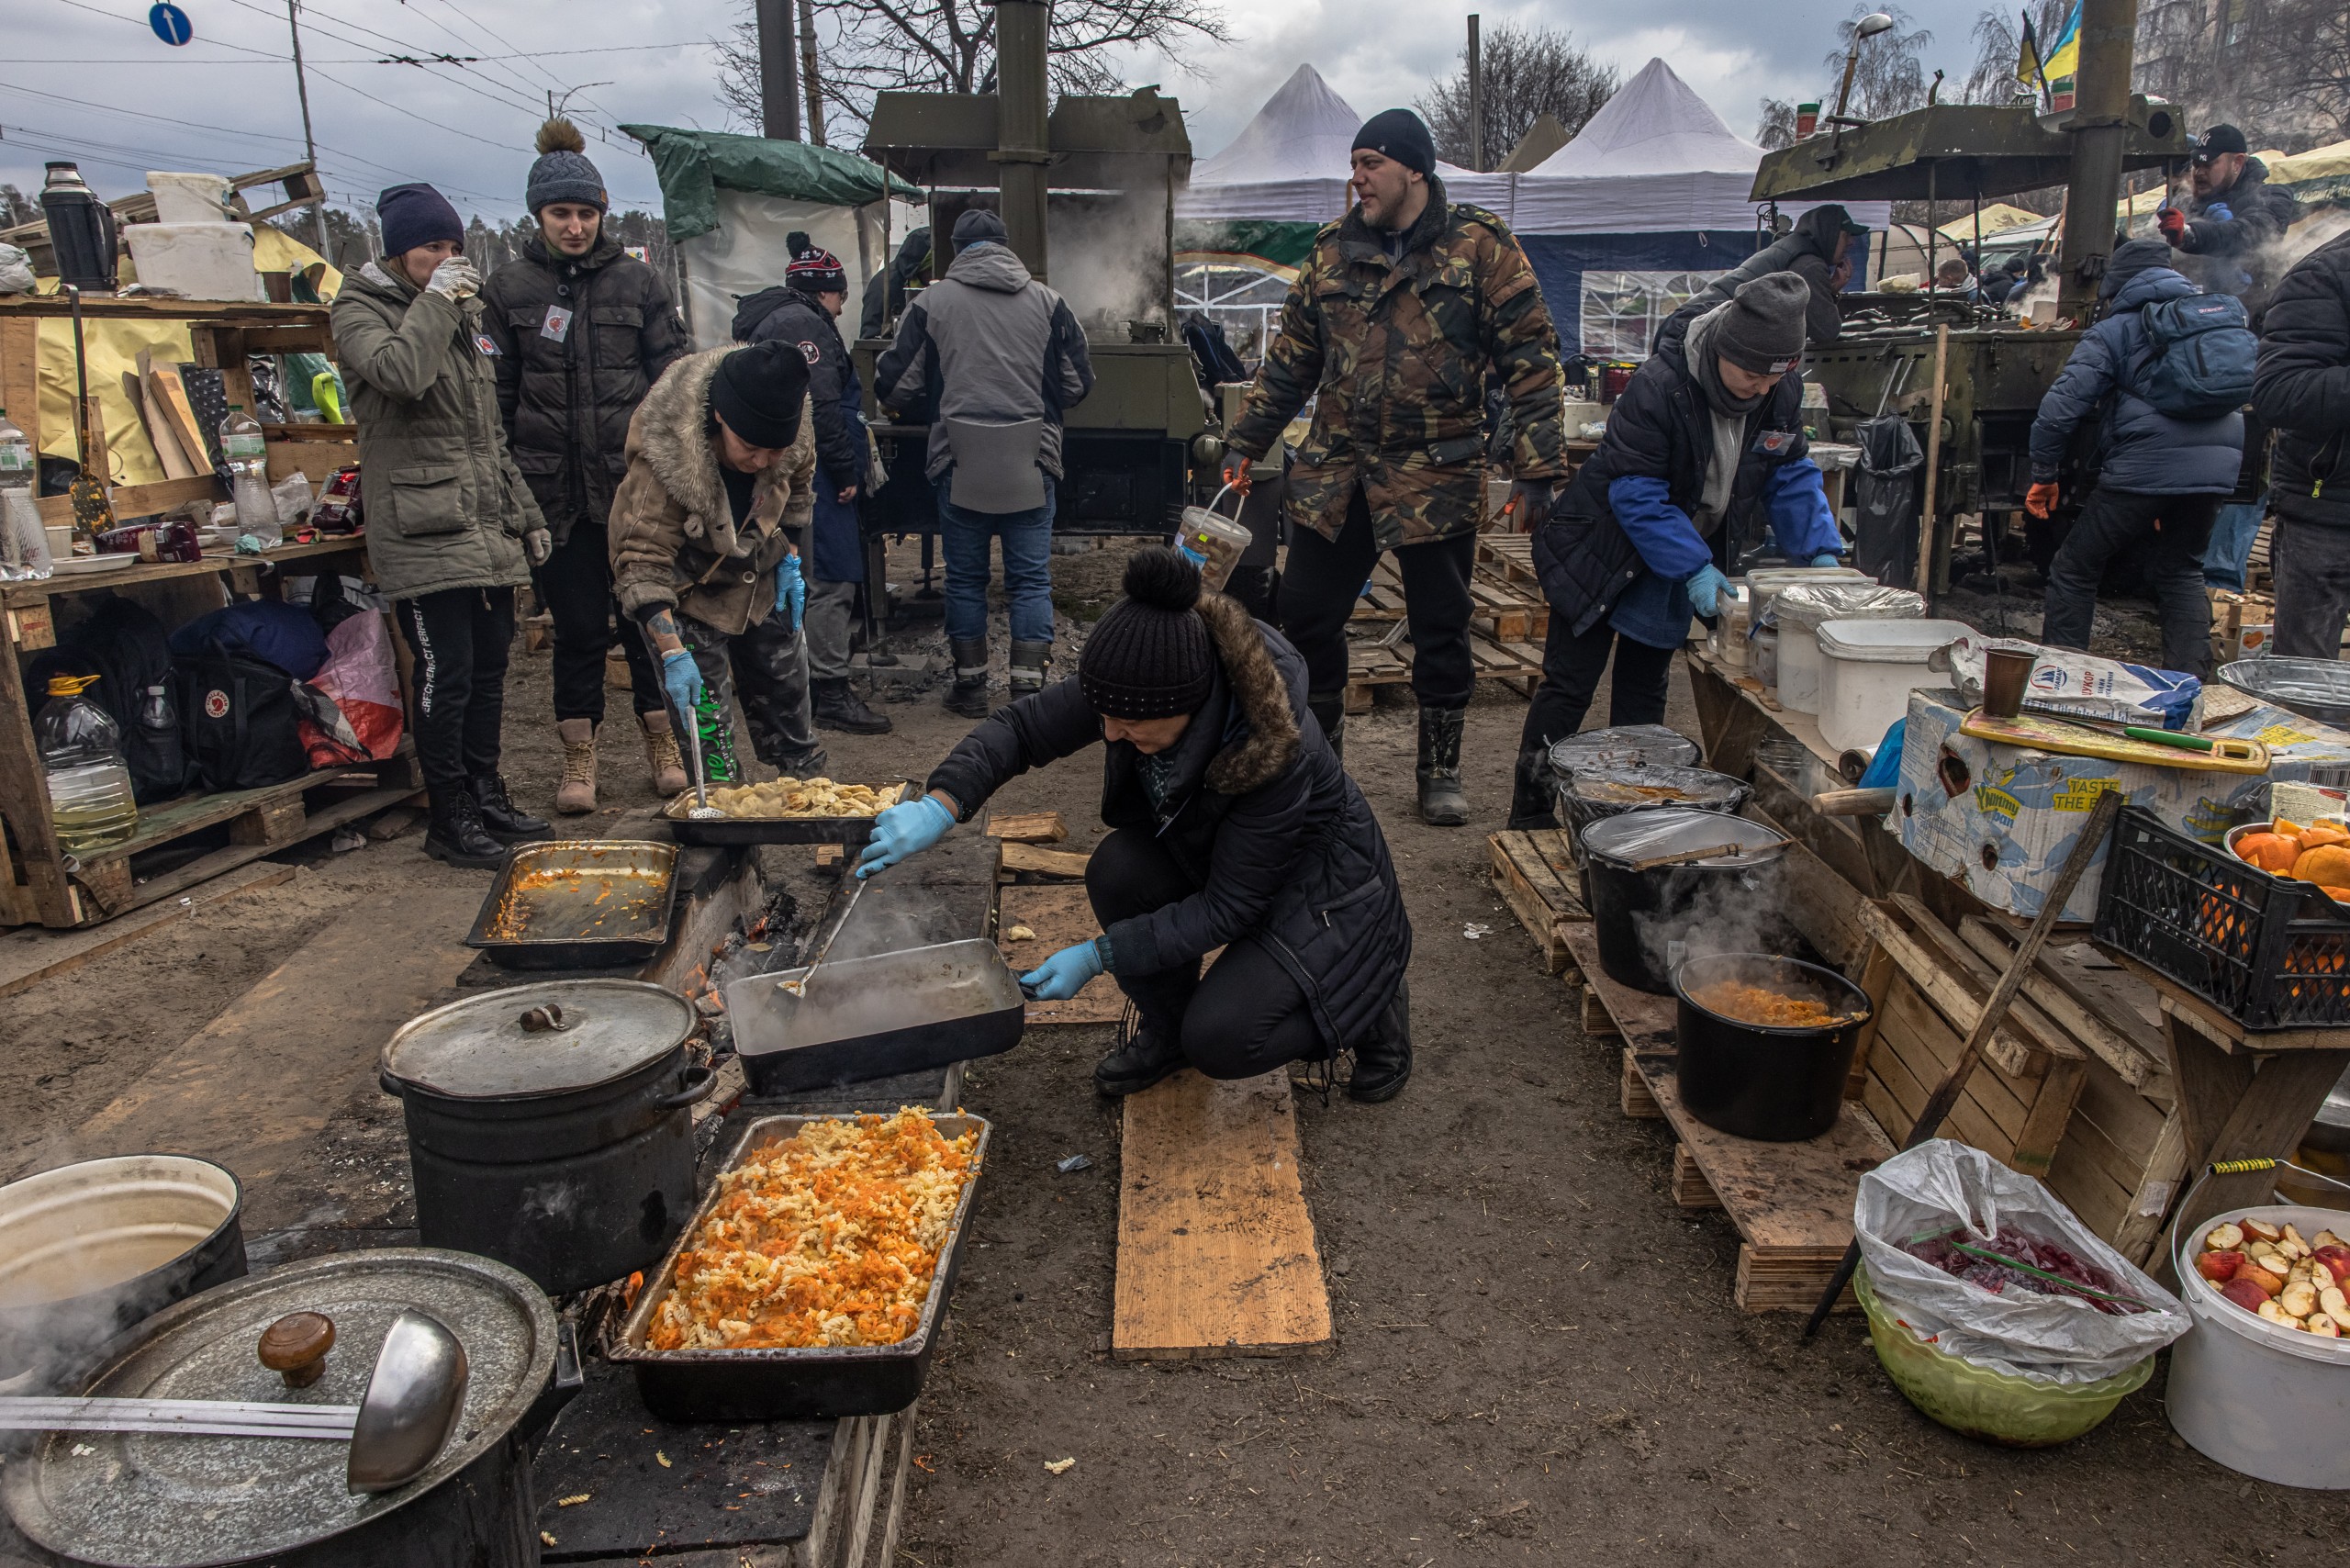 epa09813085 Local residents cook at a makeshift camp next to a checkpoint, in Kyiv (Kiev), Ukraine, 09 March 2022. At the makeshift camp local residents cook hot meals and other food for Ukrainian soldiers and other people. Ukrainian Foreign Minister Dmytro Kuleba will meet with Russian Foreign Minister Sergei Lavrov for diplomatic talks on 10 March in Turkey. Russian troops entered Ukraine on 24 February prompting the country's president to declare martial law and triggering a series of severe economic sanctions imposed by Western countries on Russia.  EPA/ROMAN PILIPEY